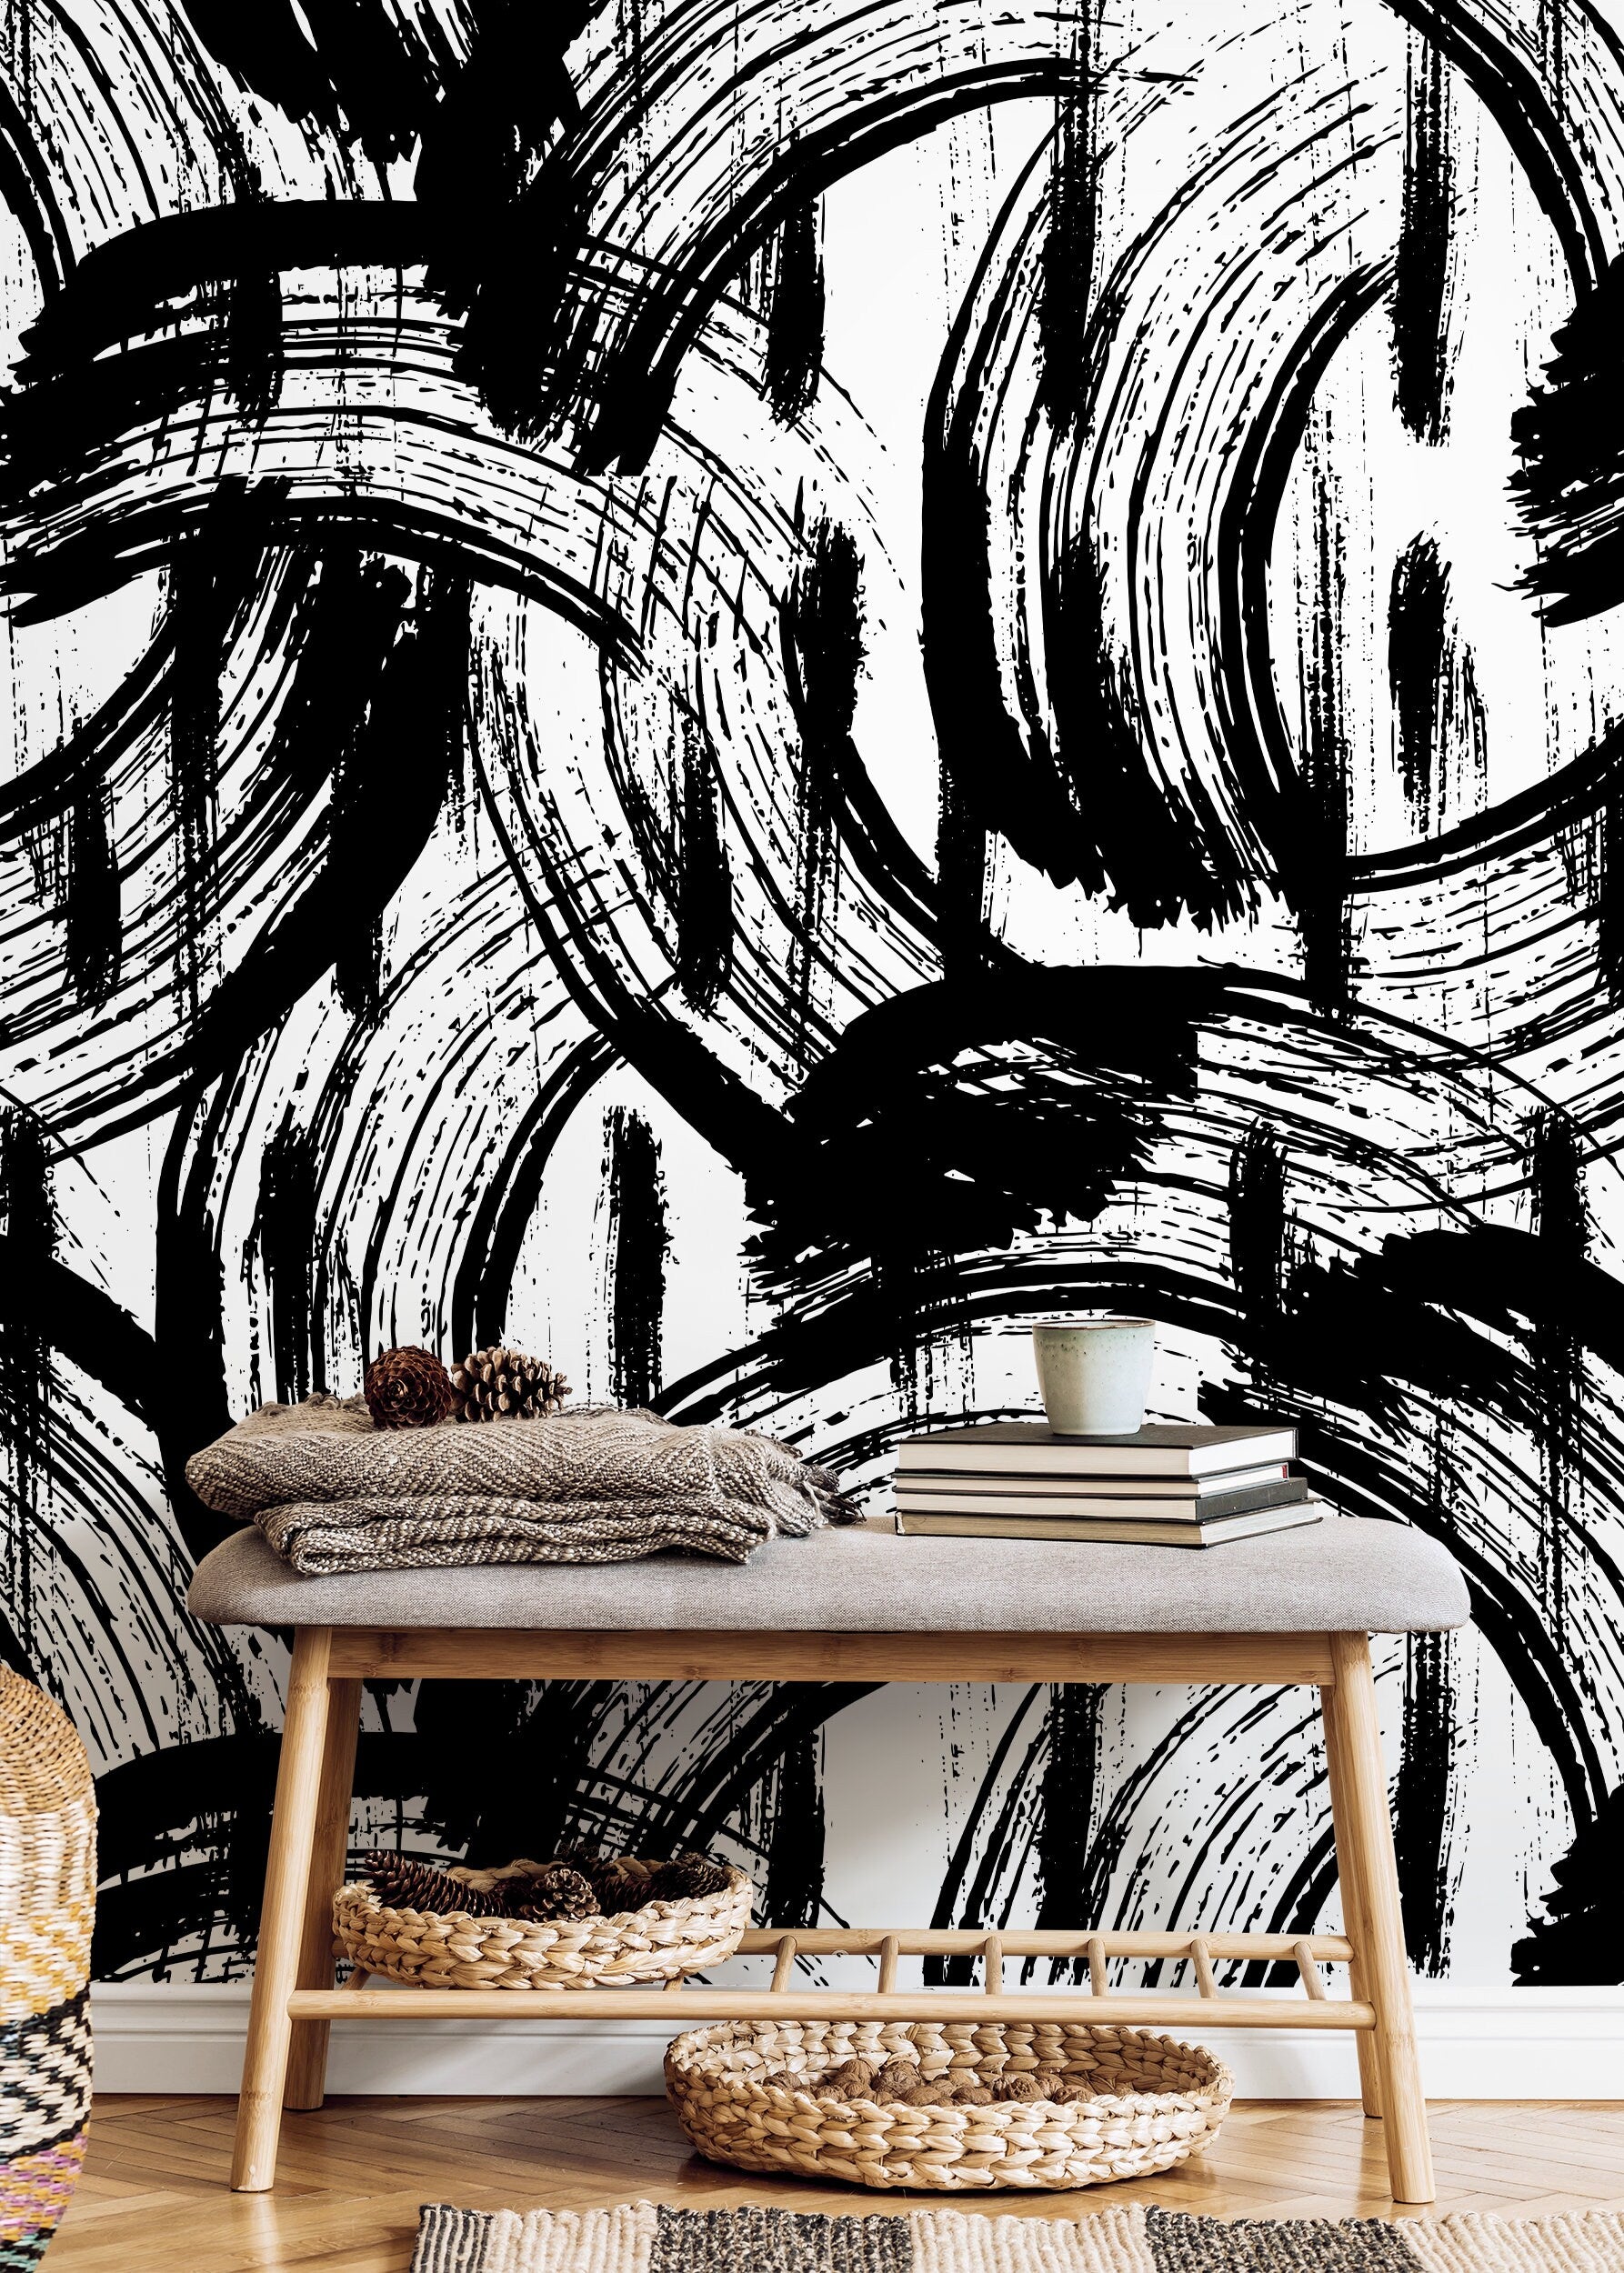 Removable Wallpaper Peel and Stick Wallpaper Wall Paper Wall Mural - Black and White Paintbrush Wallpaper - B039